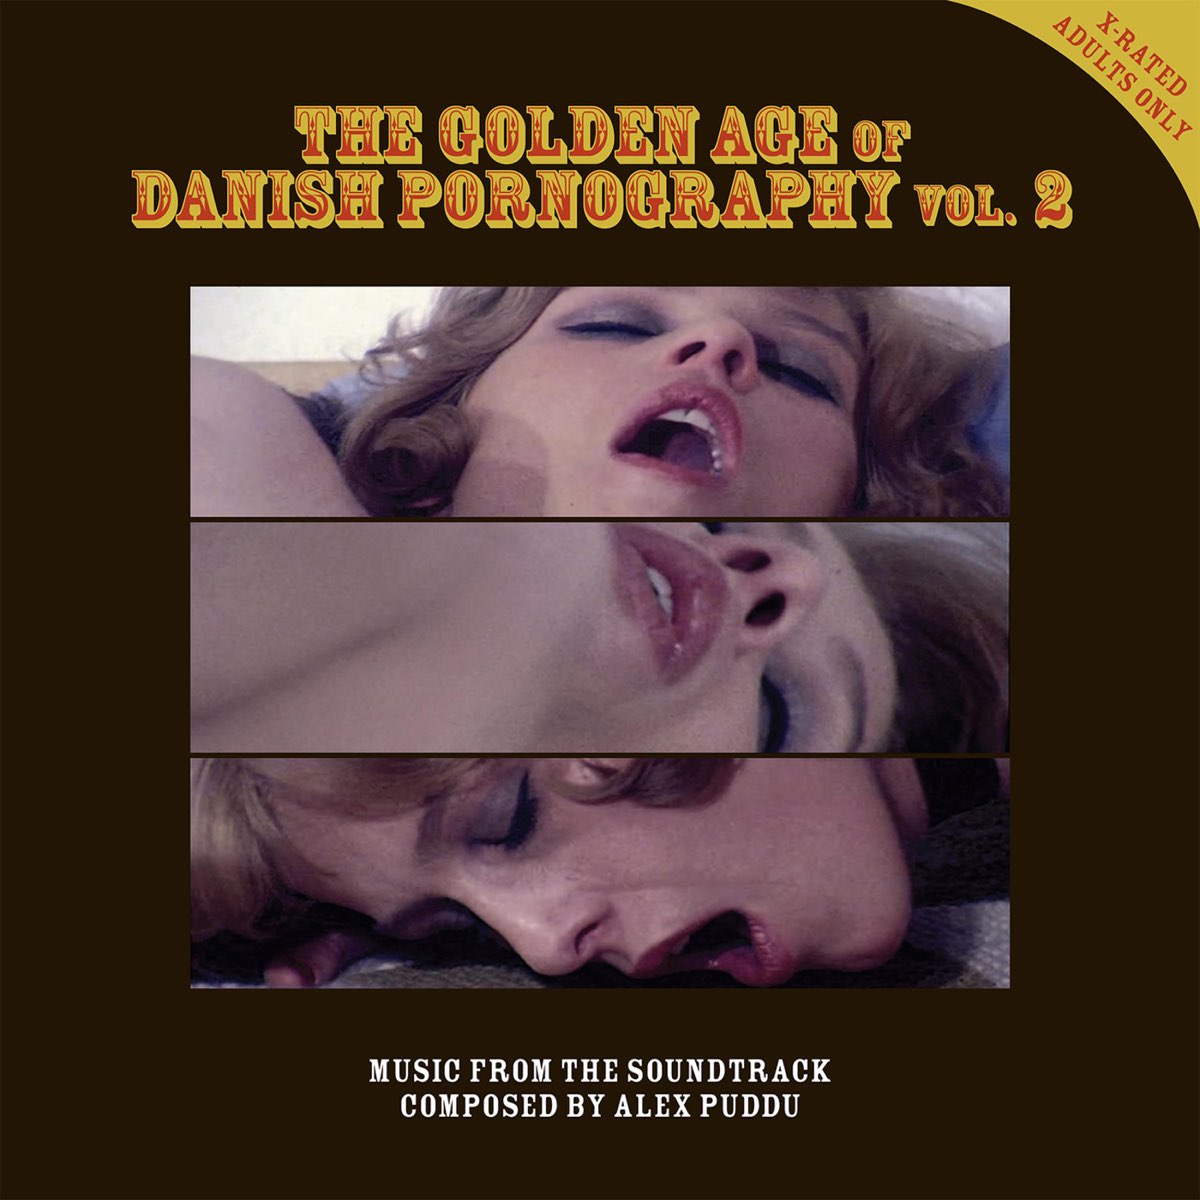 1200px x 1200px - The Golden Age of Danish Pornography Volume 2 (Original Adult Film  Soundtrack) by Alex Puddu on Apple Music